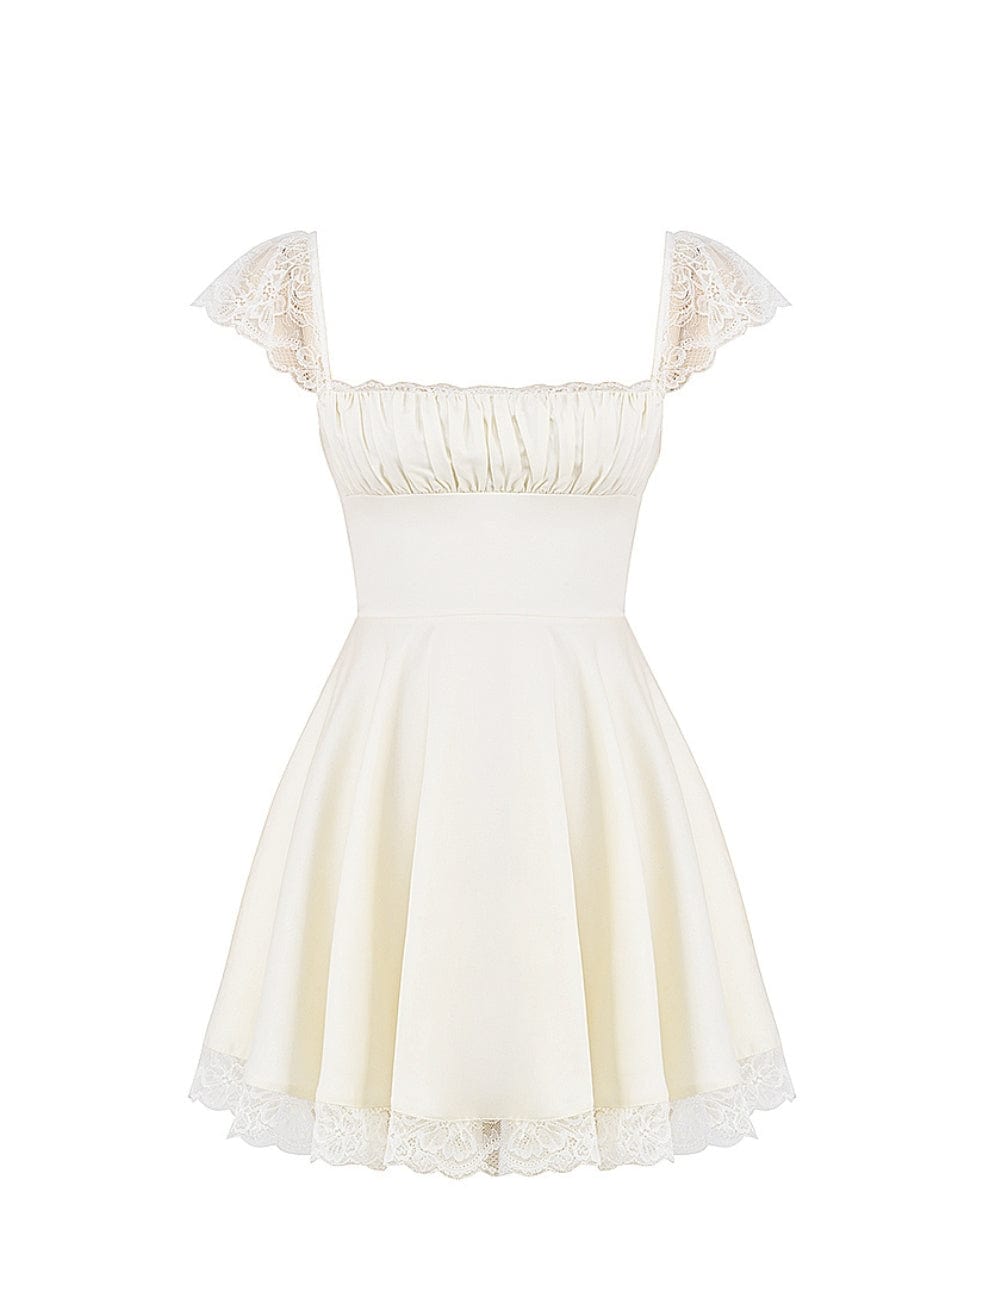 Kaia Dress in Ivory